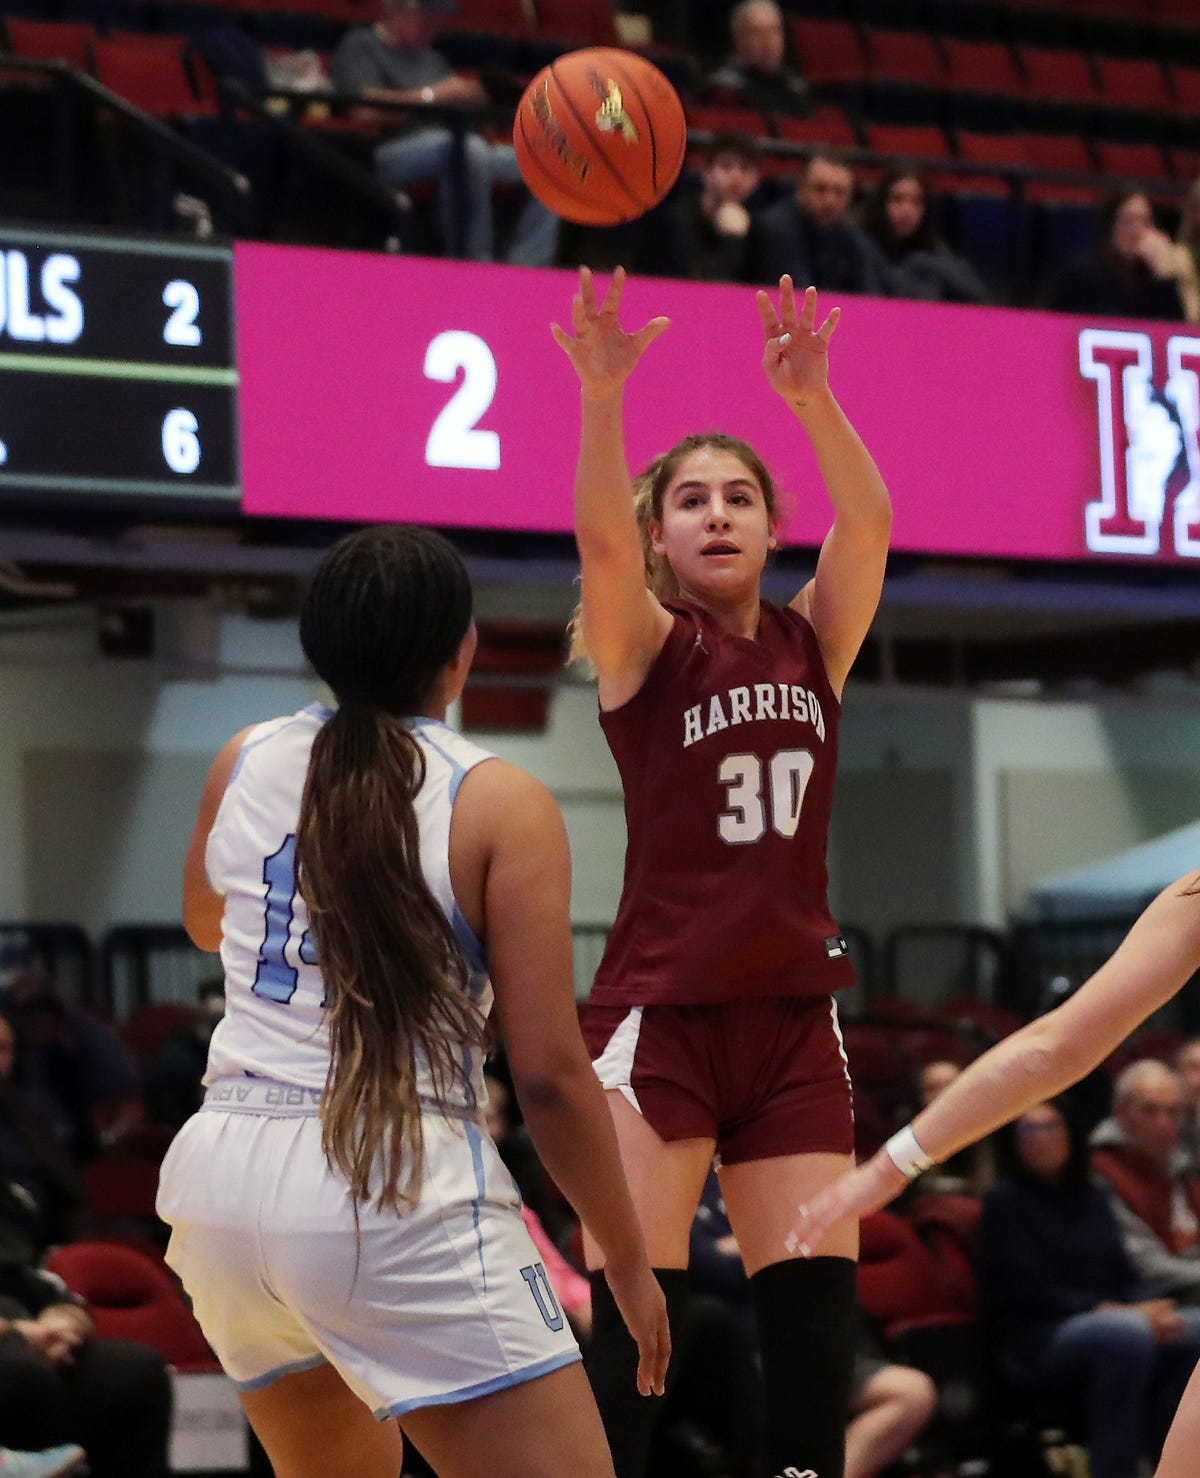 Ursuline to Face Albertus Magnus in Section 1 Class AA Girls Basketball Final Rematch